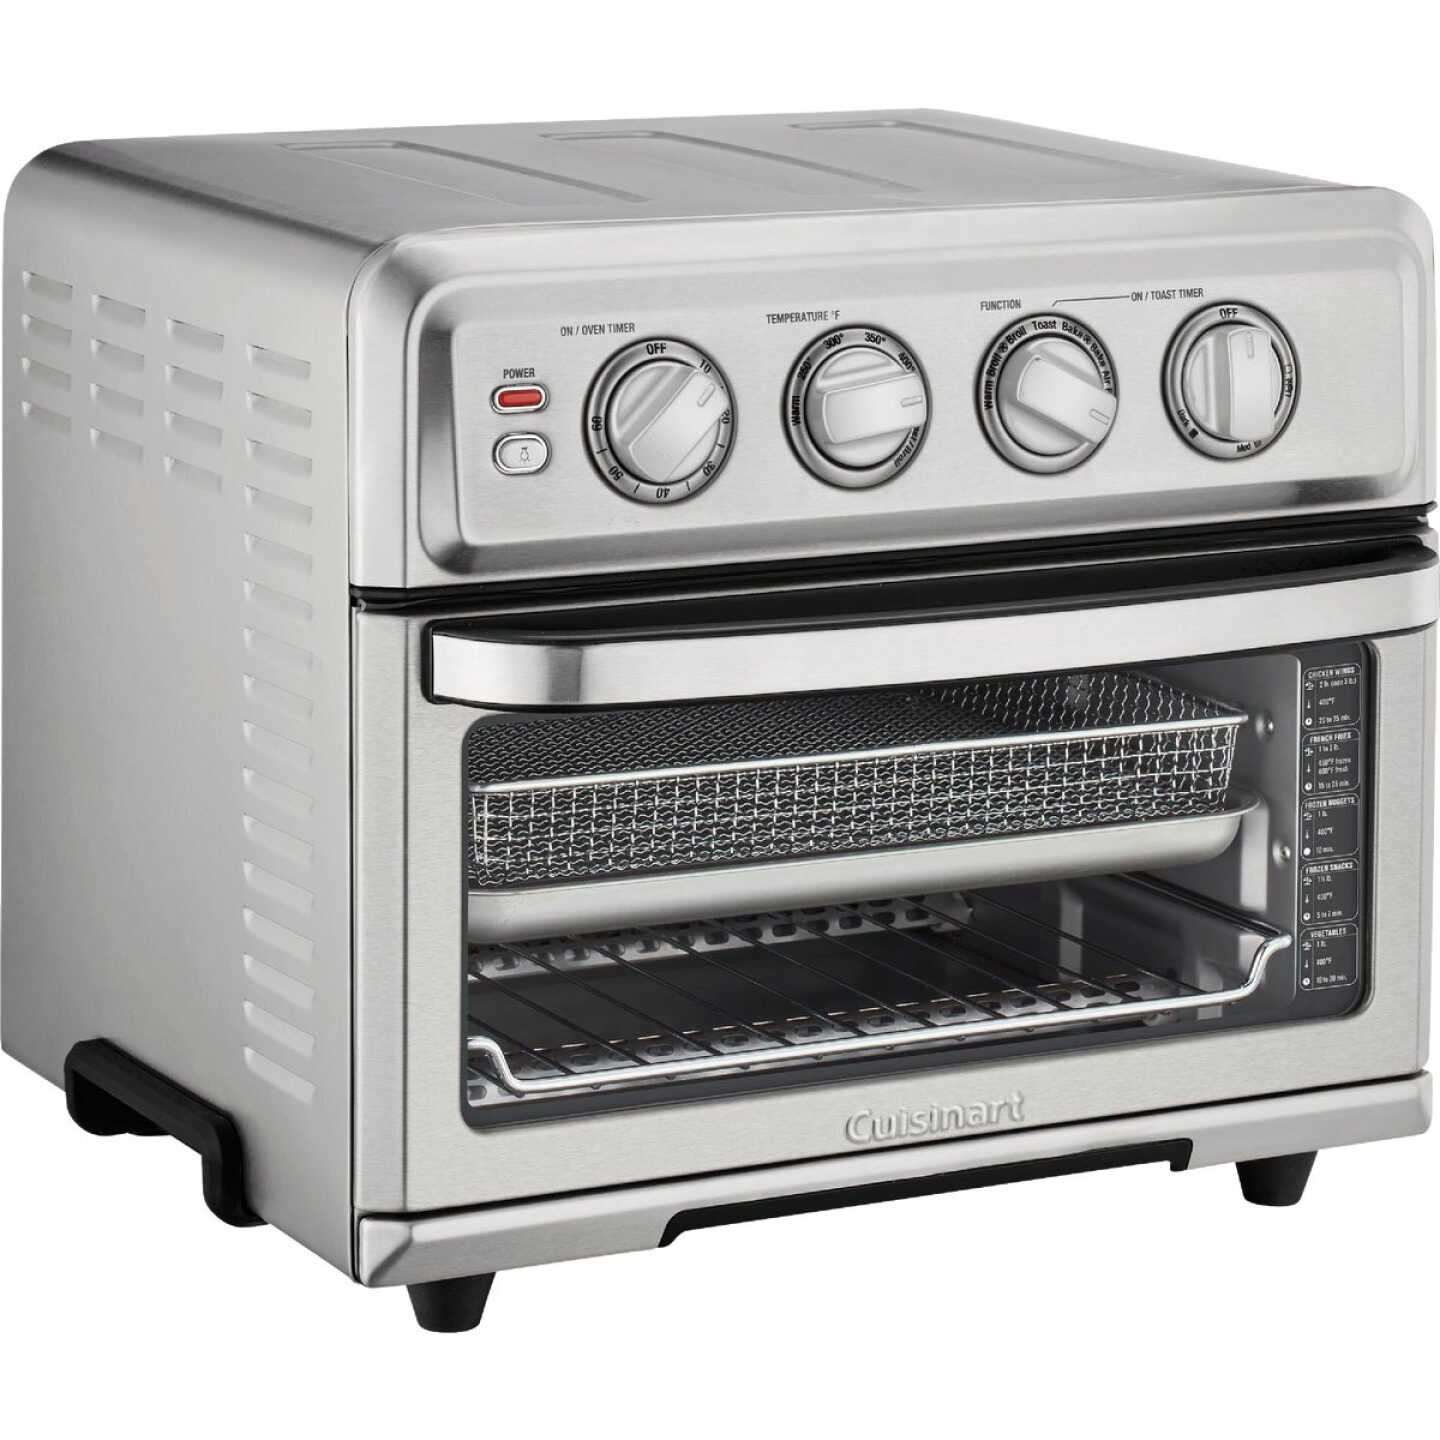 Cuisinart AirFryer Toaster Oven with Grill - Power Townsend Company